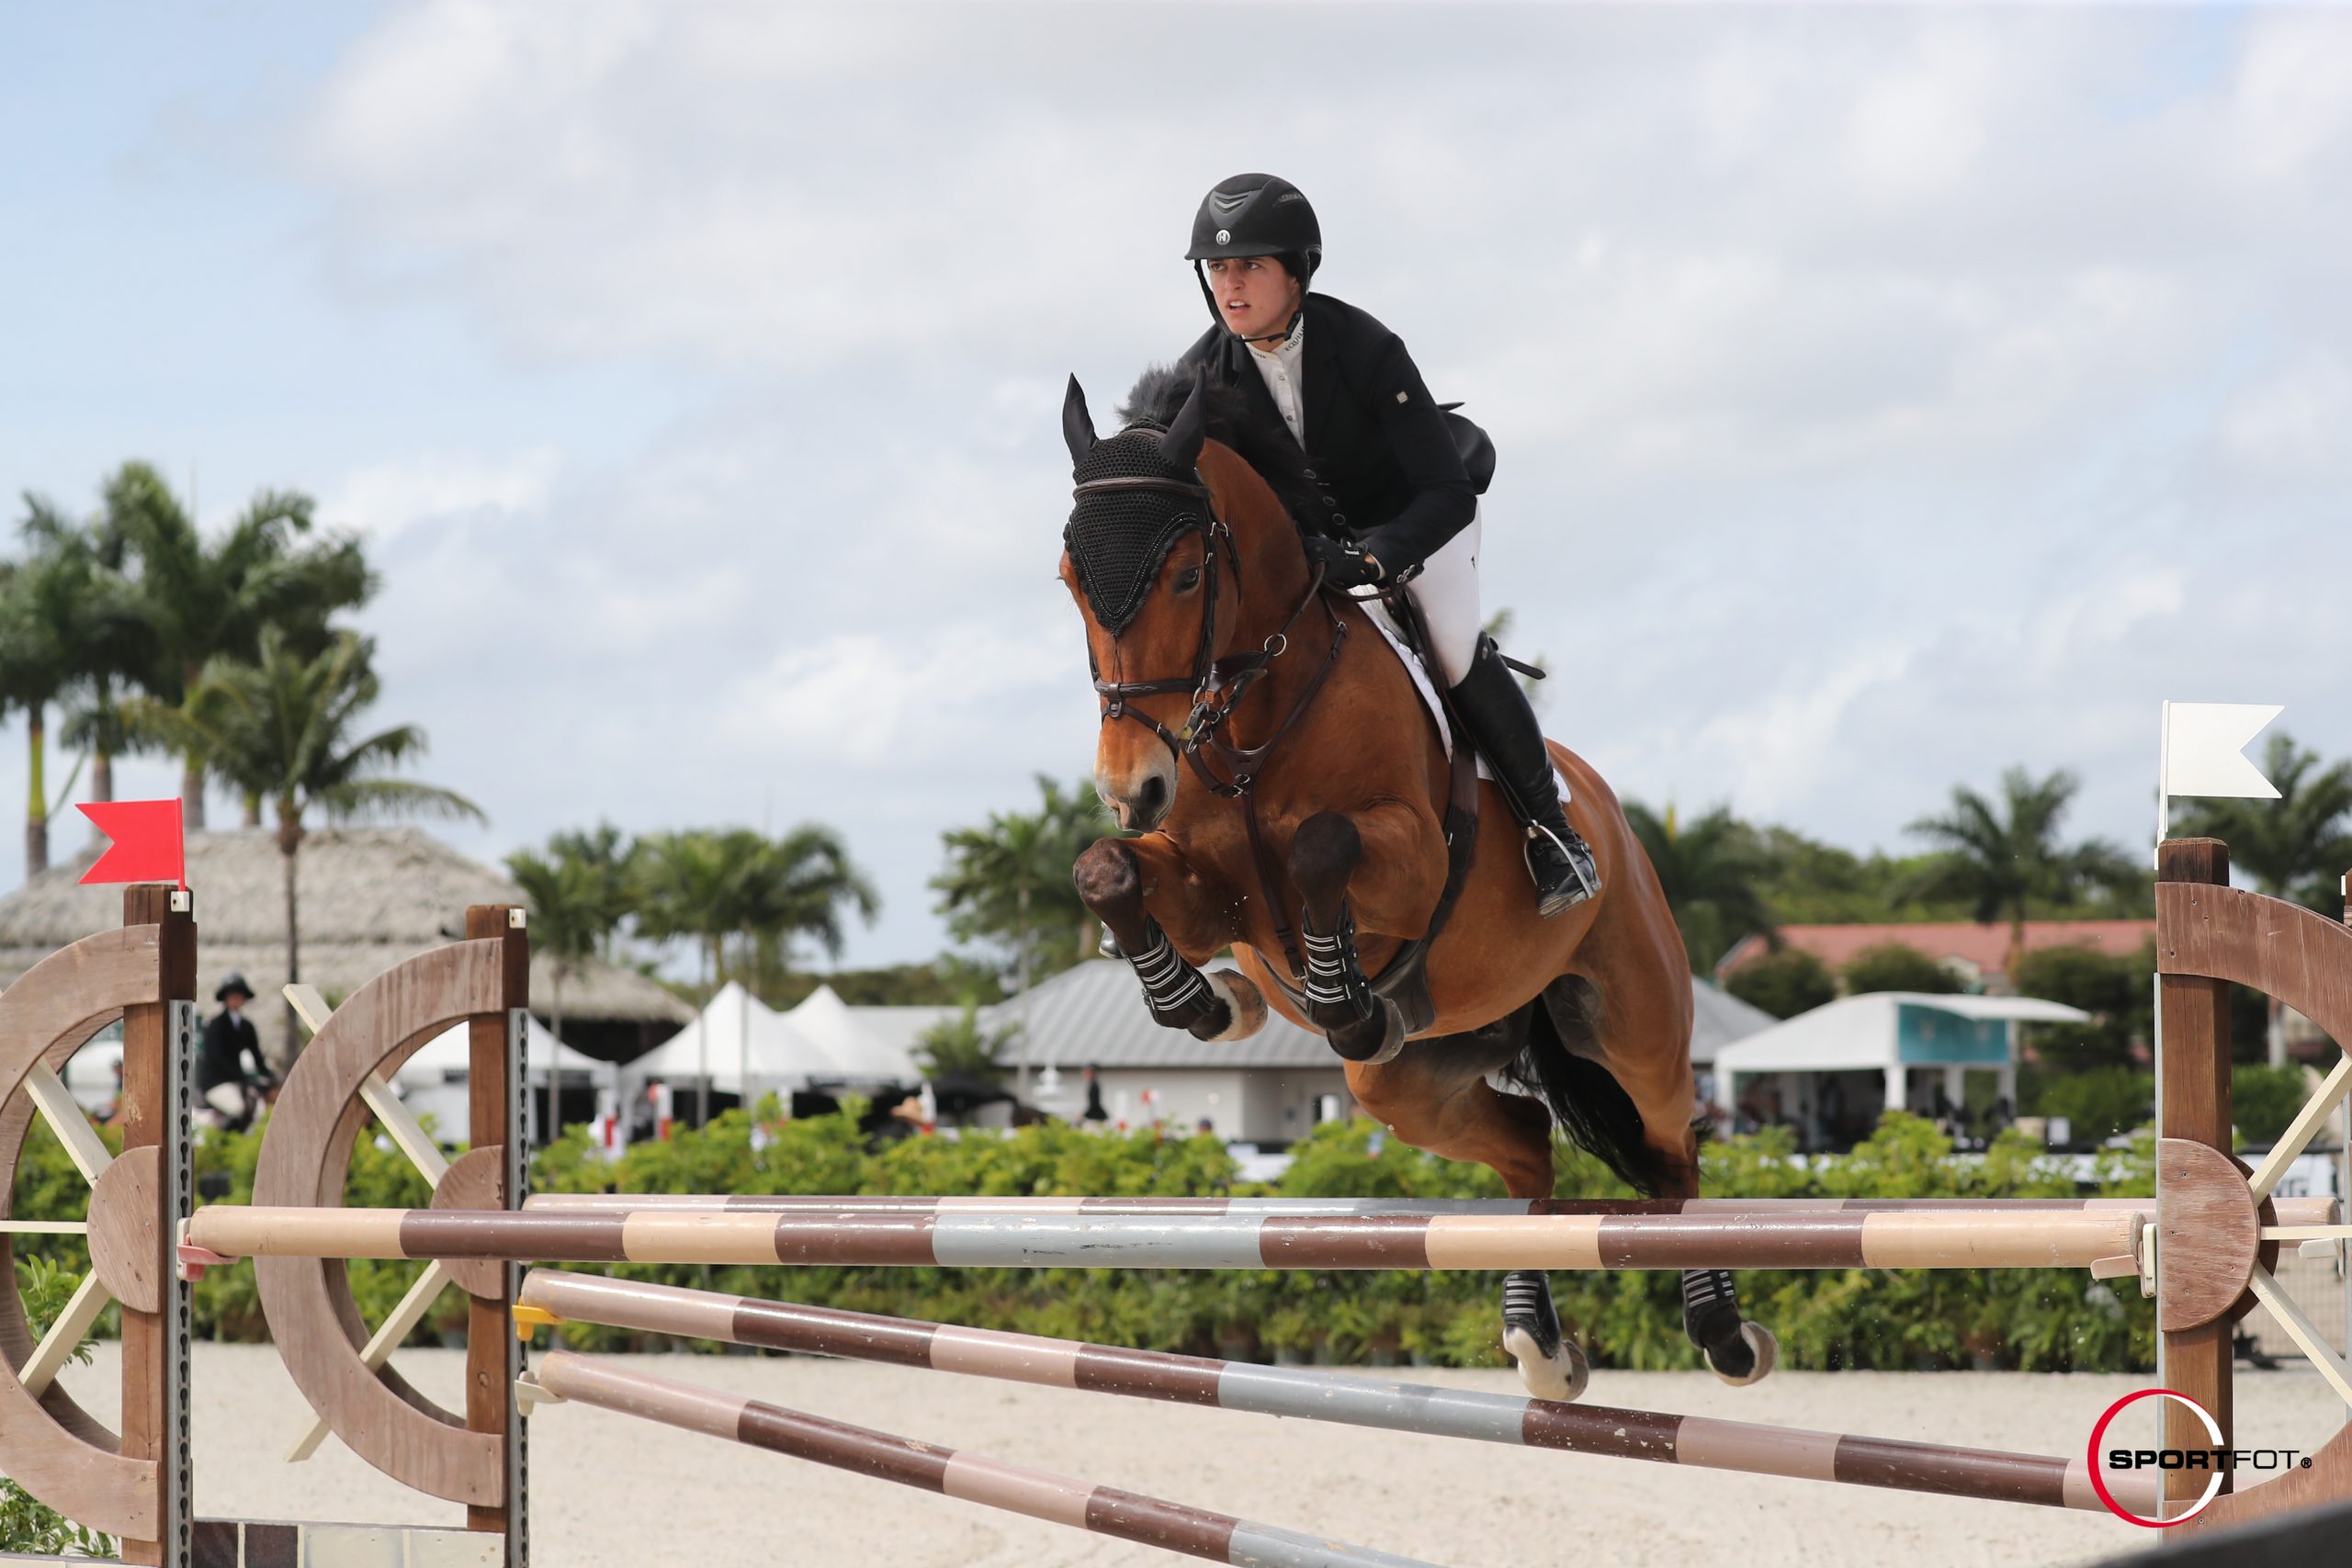 We are happy to see reference Darknight de Maluga doing well with his new rider Mckayla Langmeier!